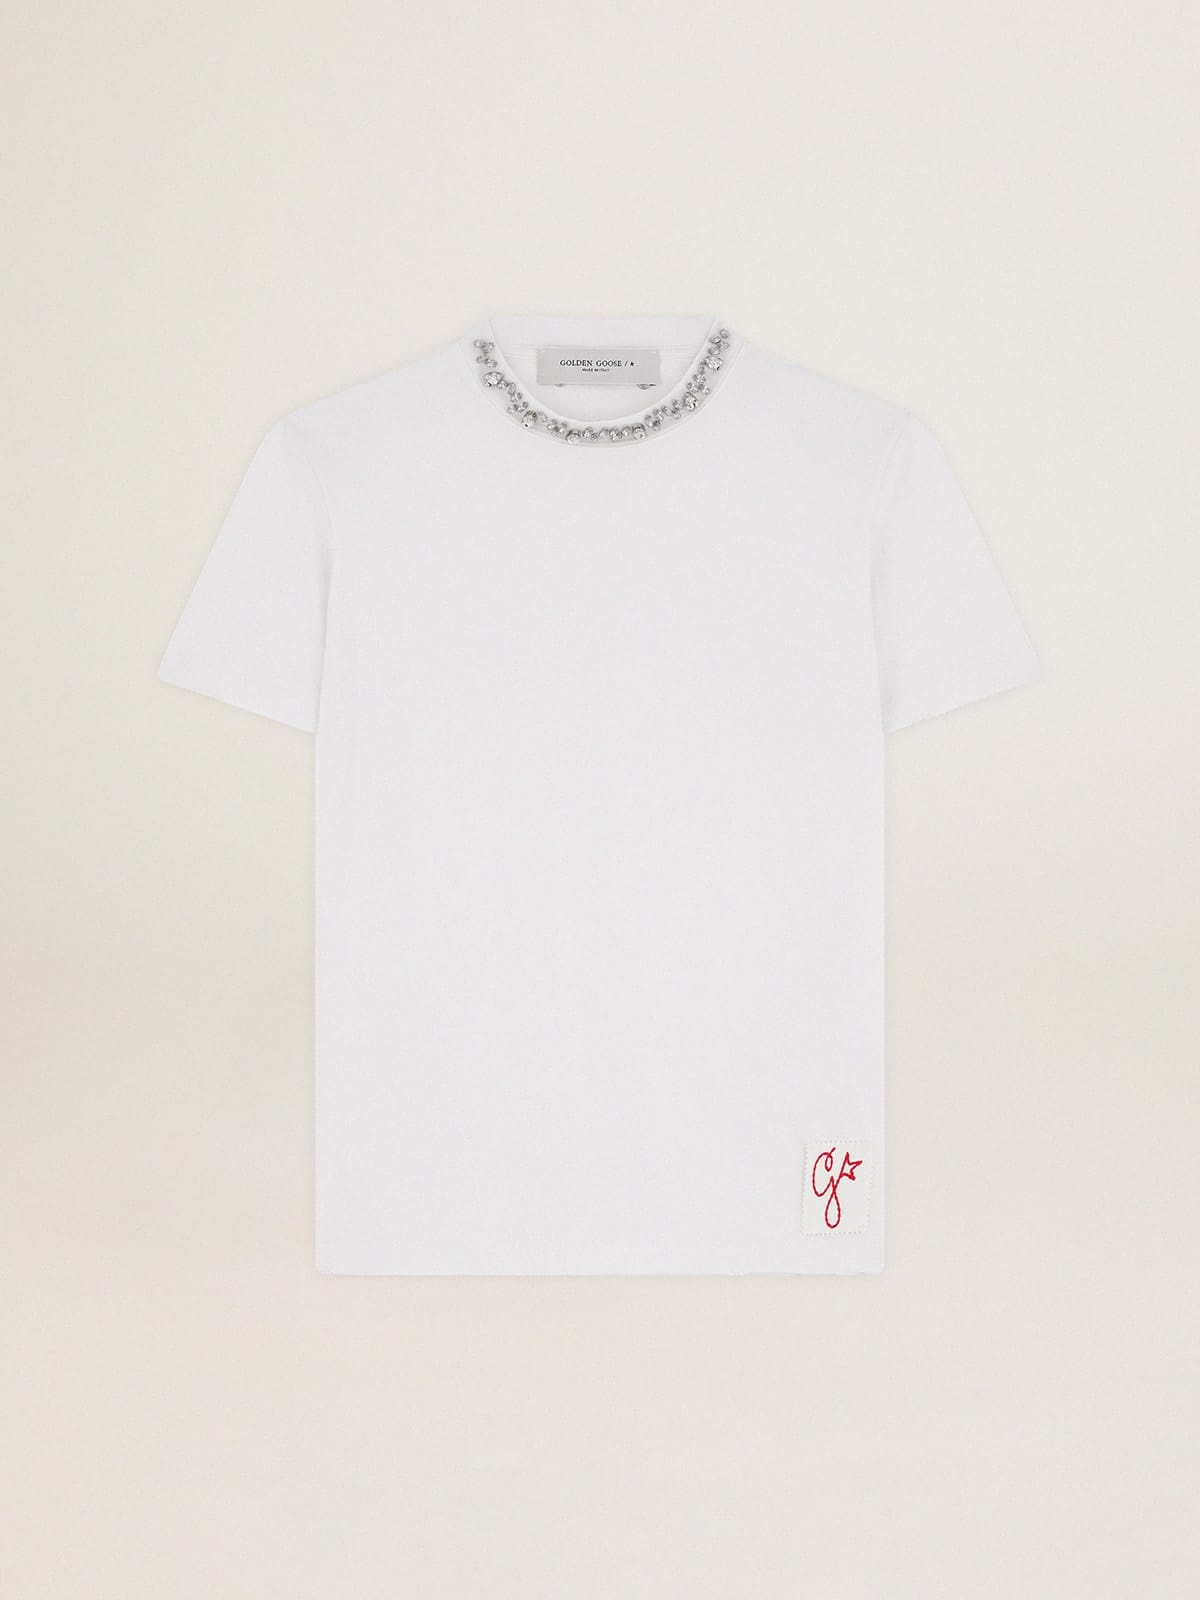 Women's white T-shirt with cabochon crystals - 1